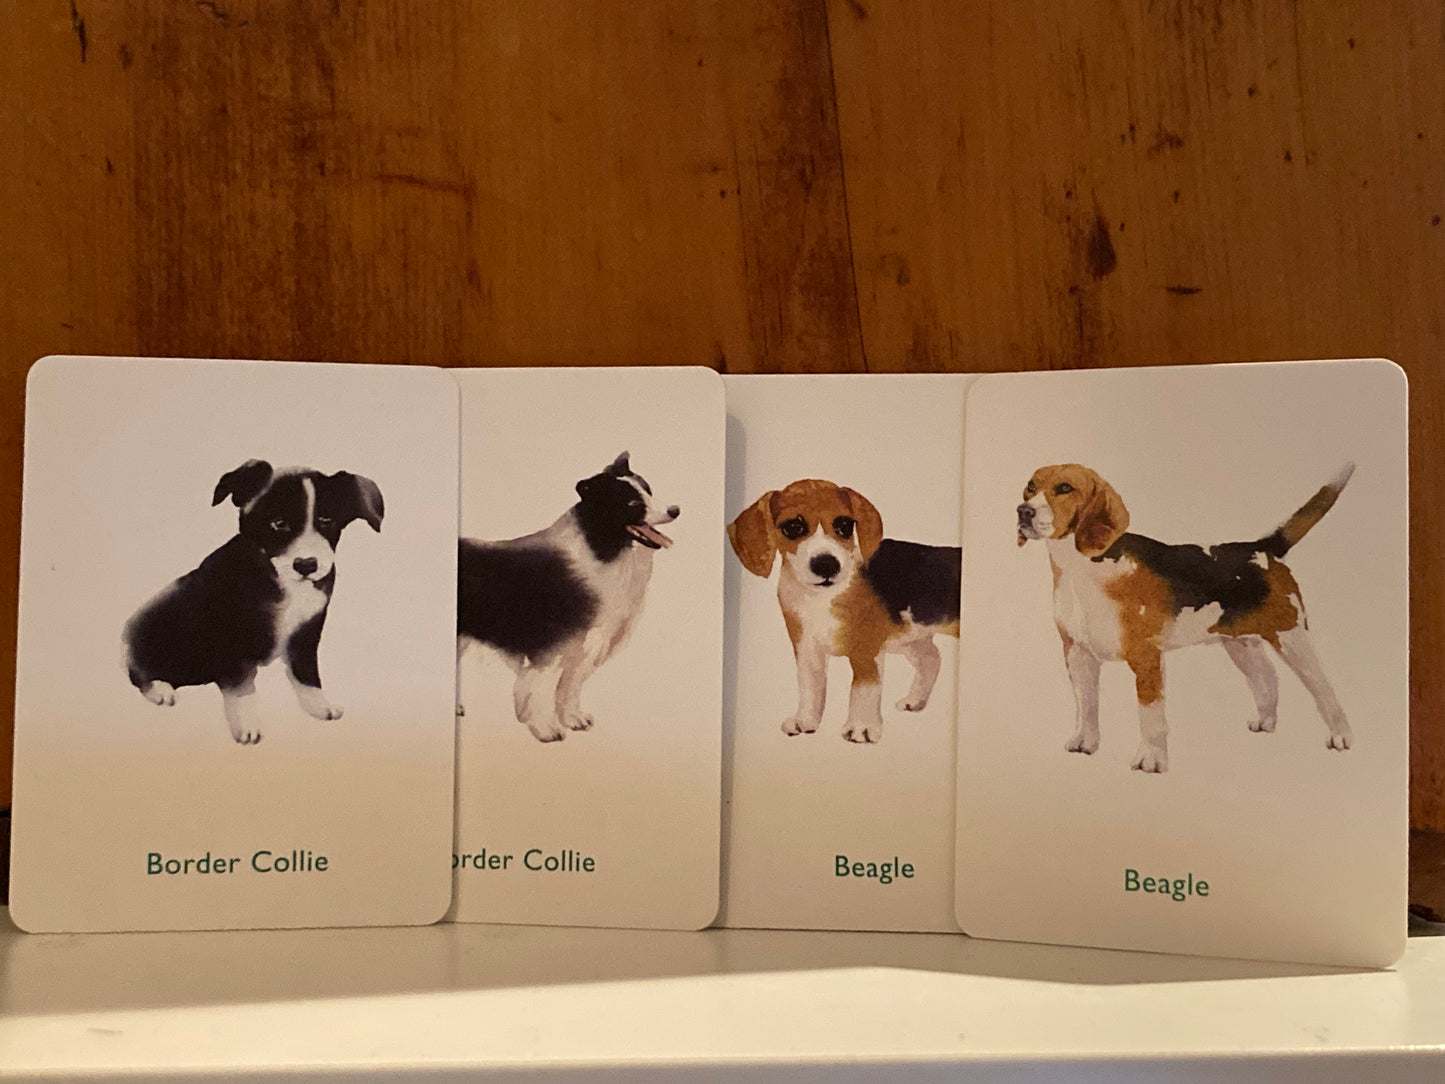 Memory Game Set - DOGS & PUPPIES